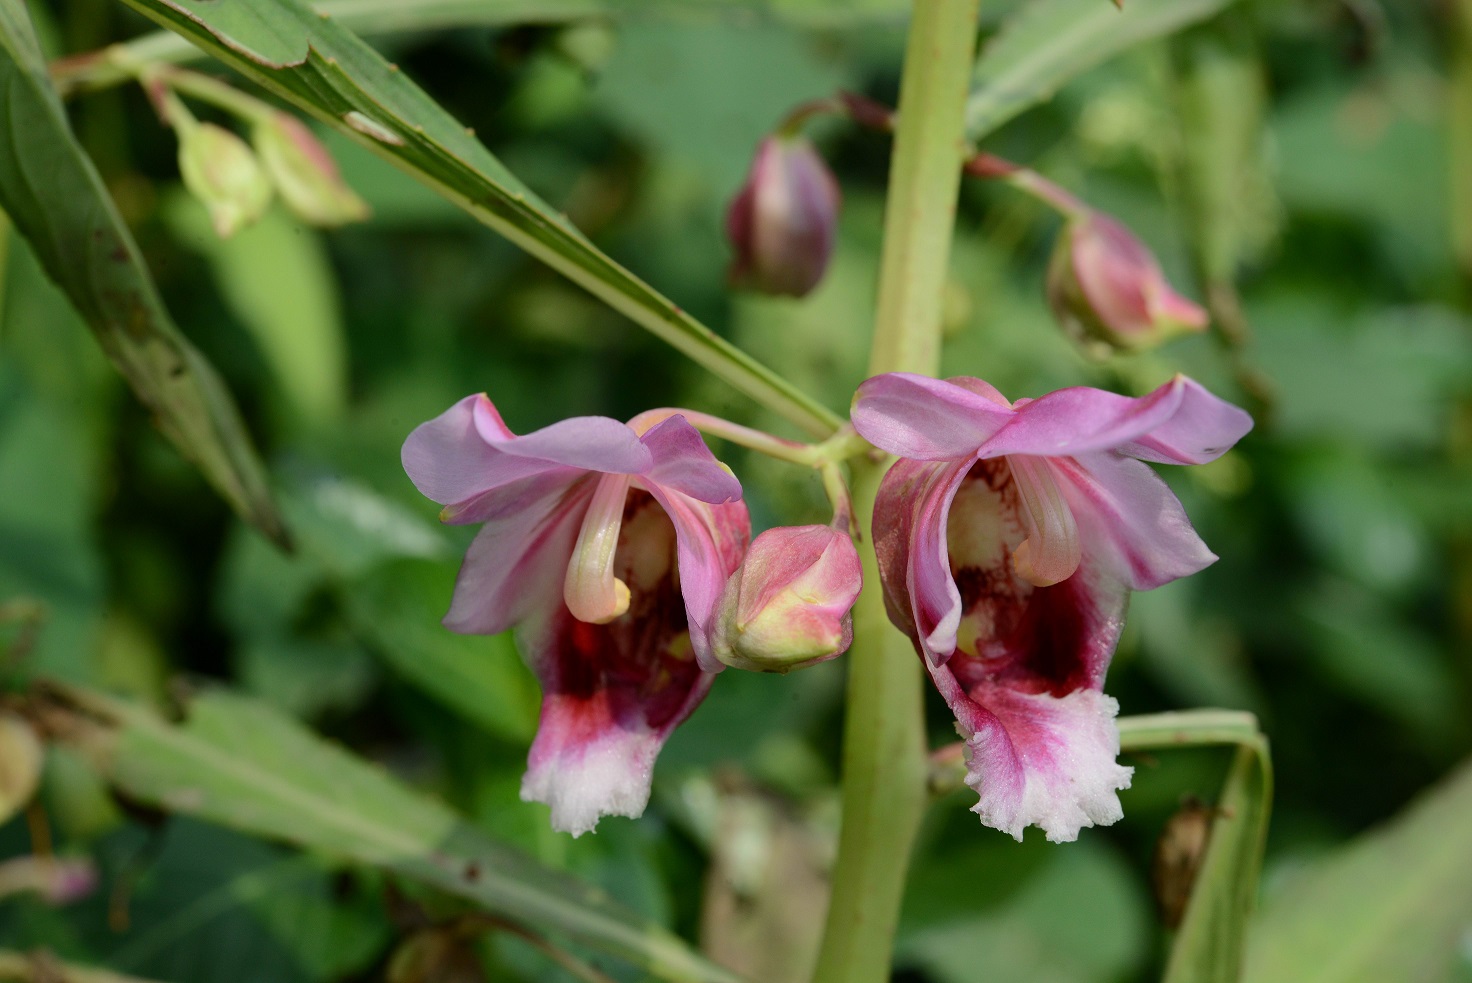 Two pink tubular flowers of Hydrocera triflora, the centres are dark pink whilst the tips of the petals are light pink